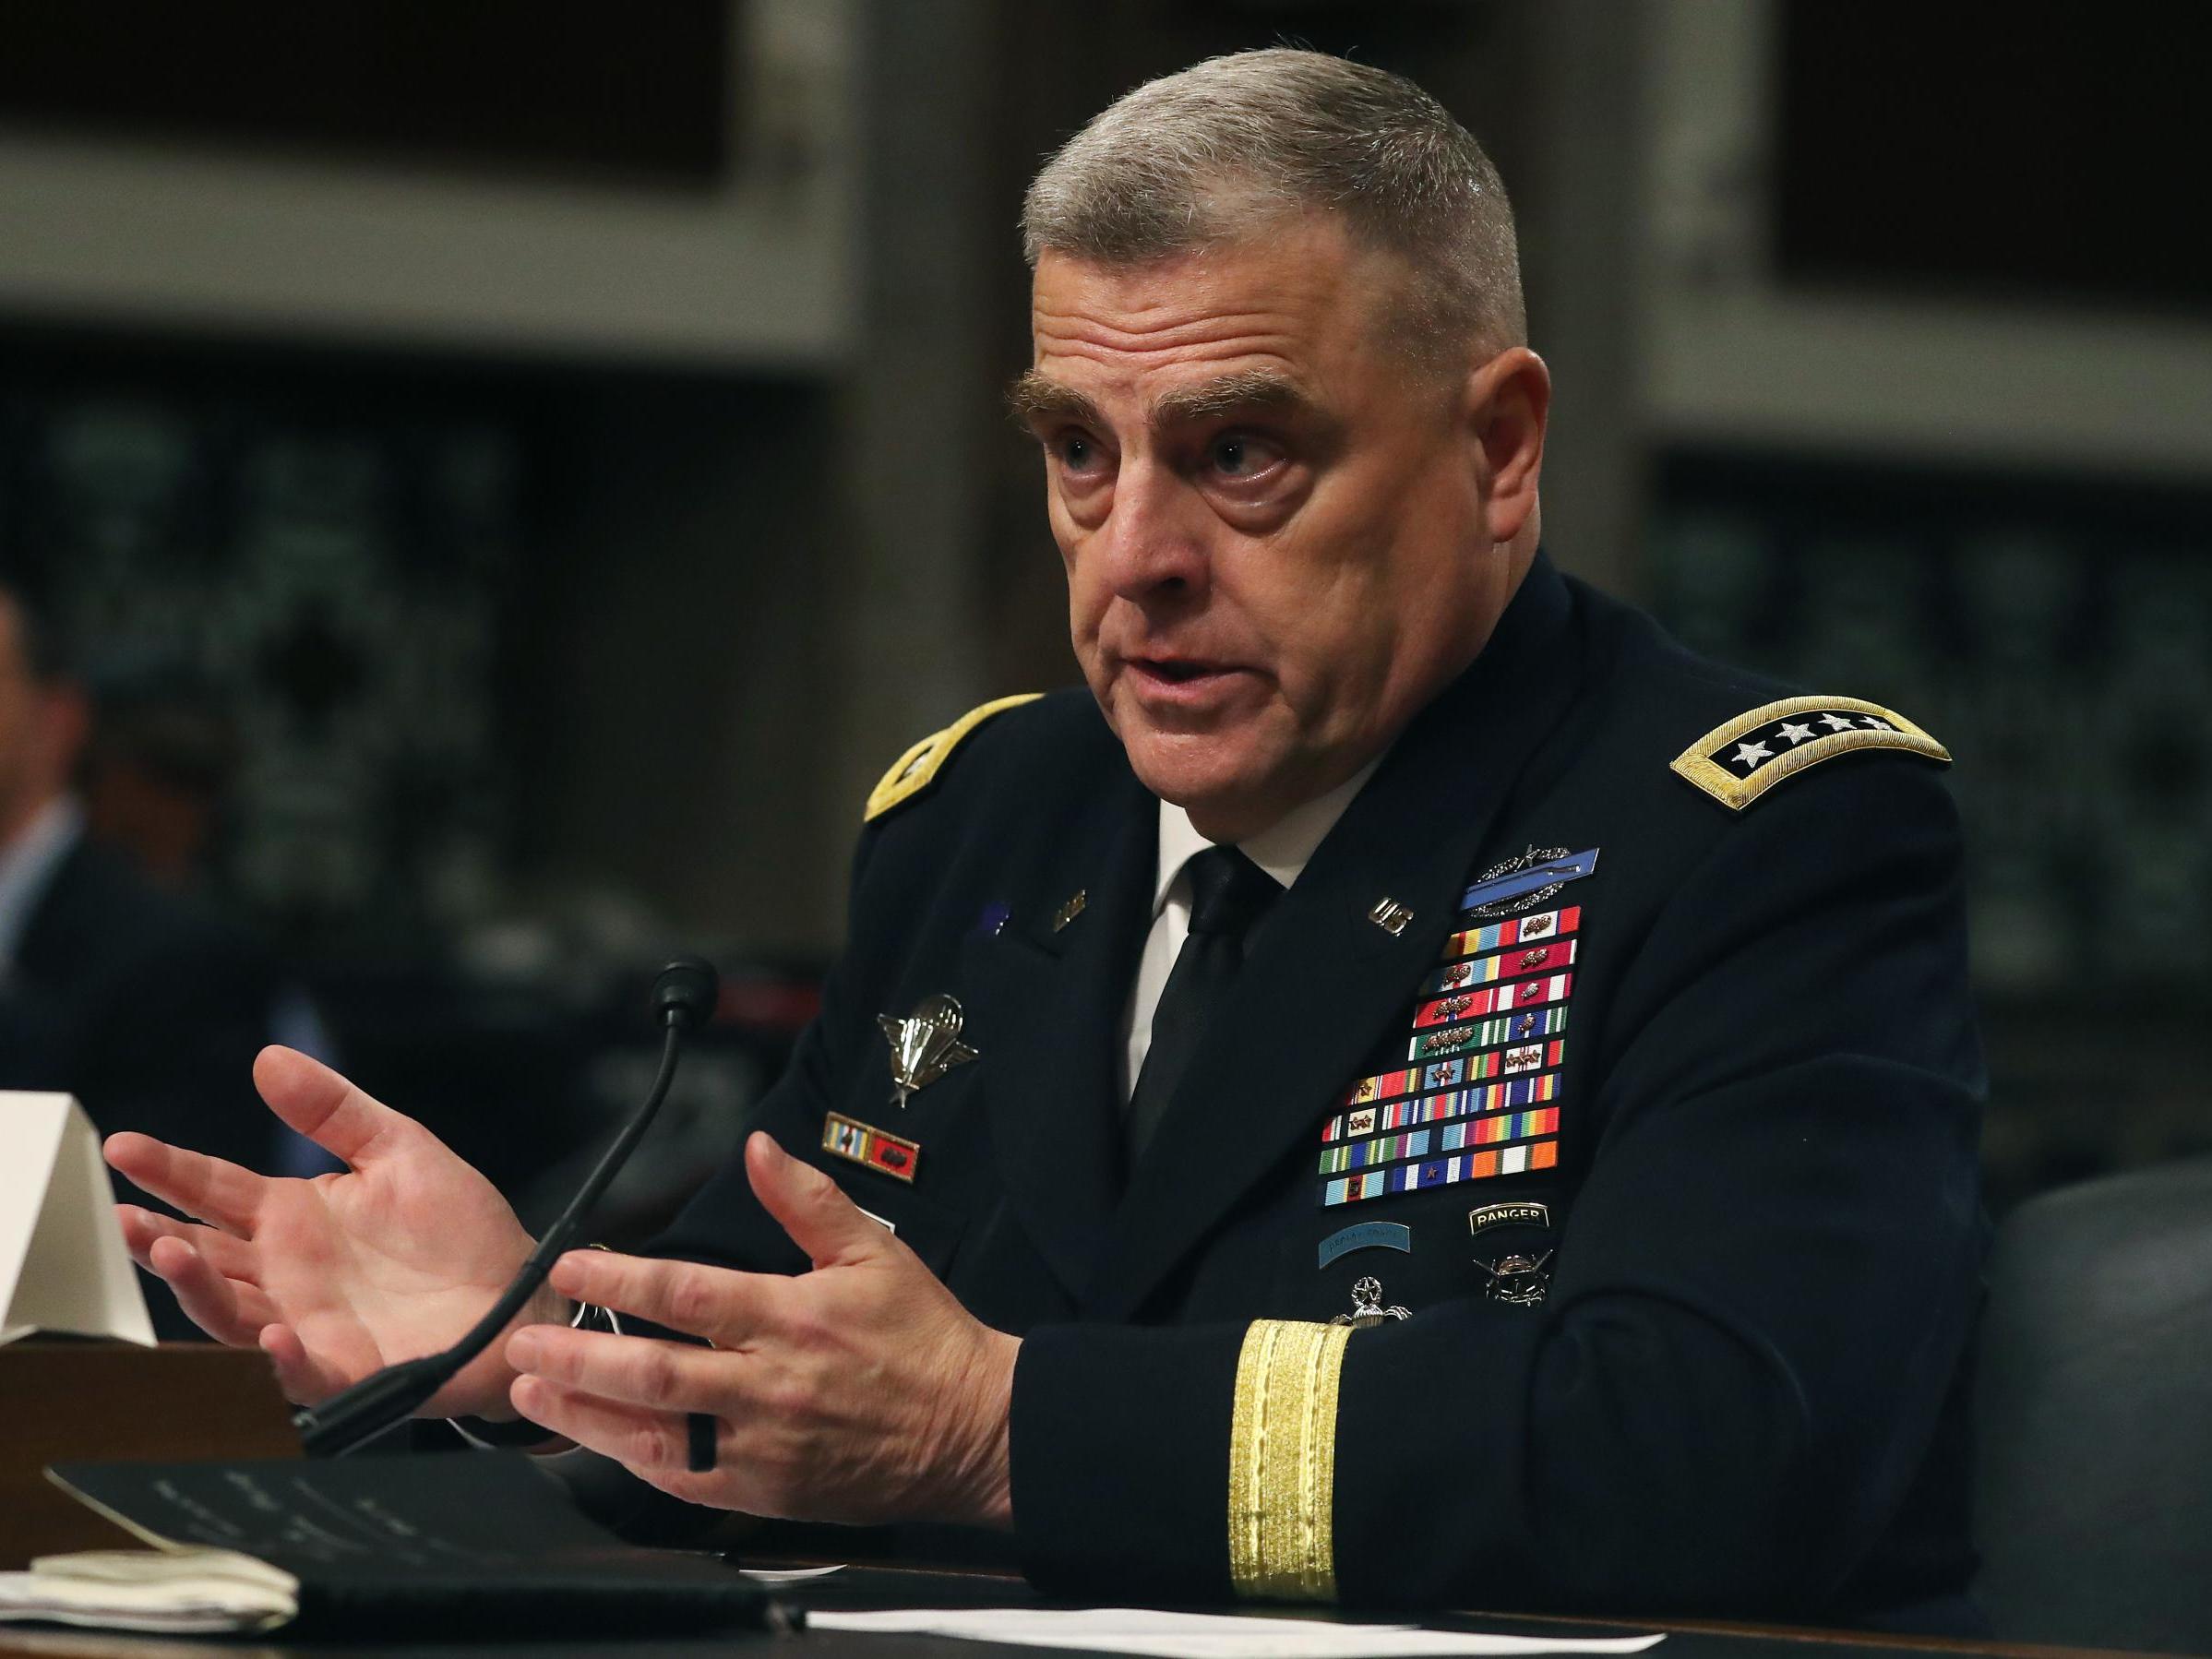 Trump's nominee for top US military officer pledges not to unduly defer to president's wishes